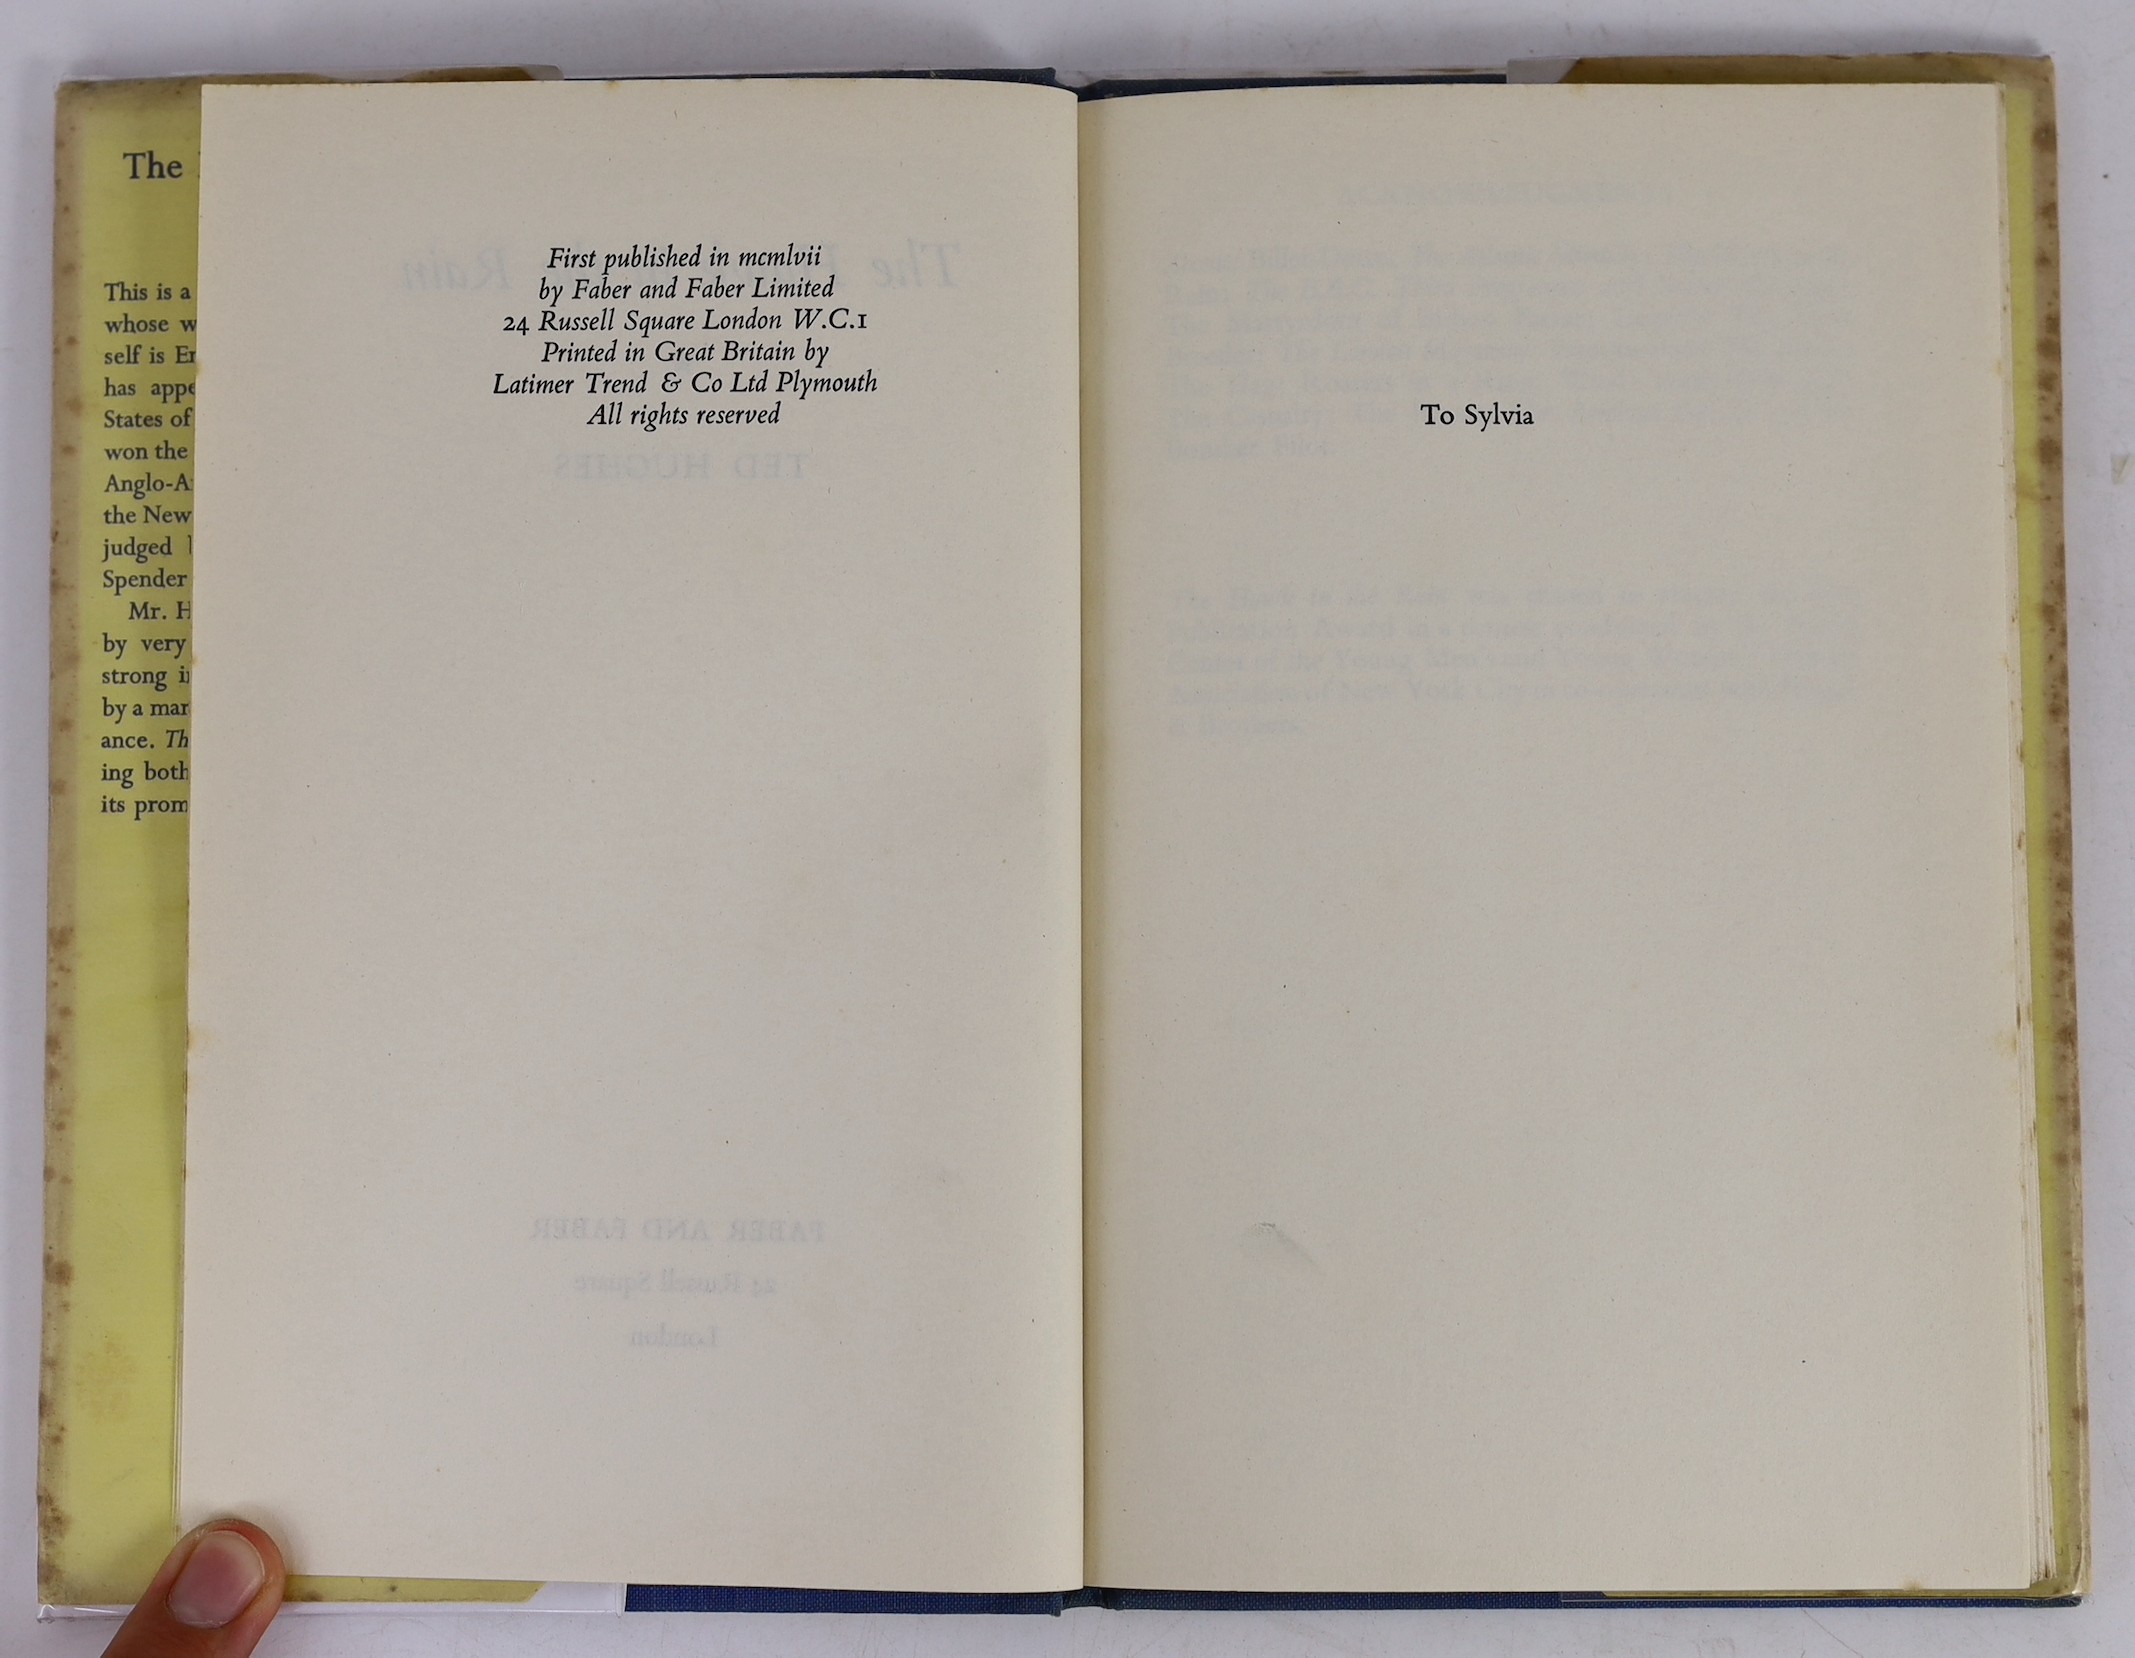 Hughes, Ted - The Hawk in the Rain. first edition. half title; blue cloth and d/wrapper. 1957